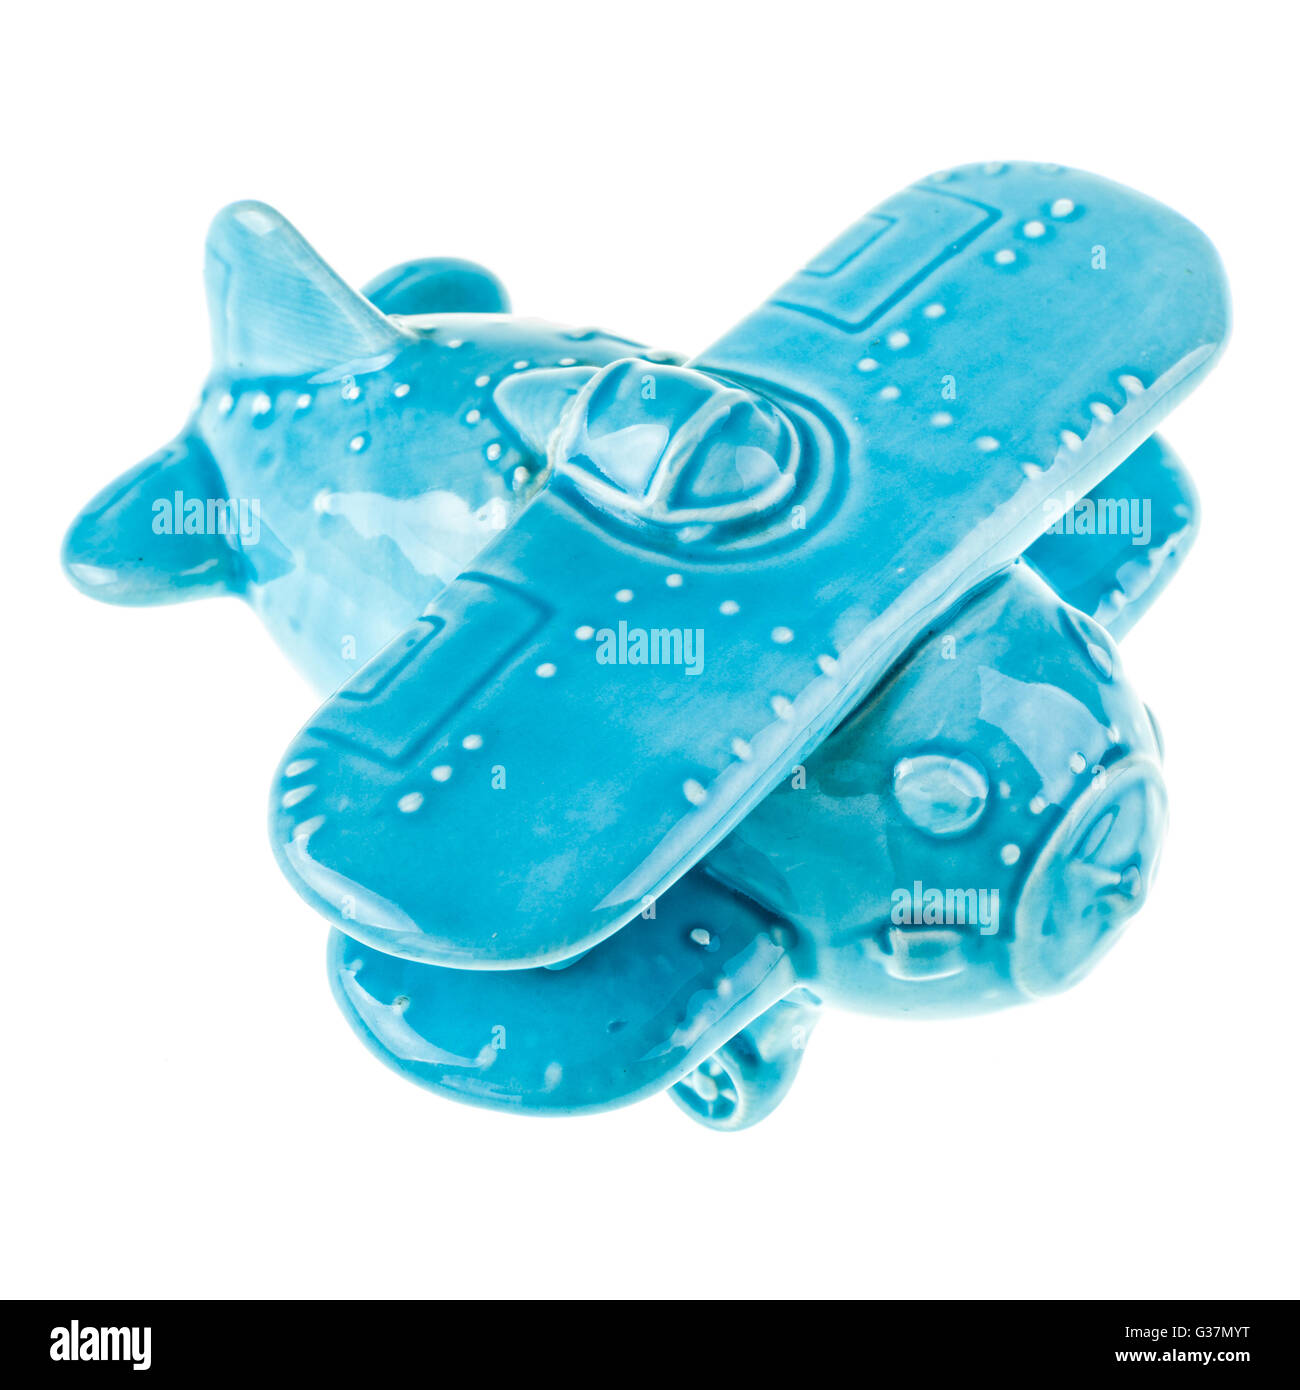 a blue porcelain cute airplane model isolated over a white background Stock Photo